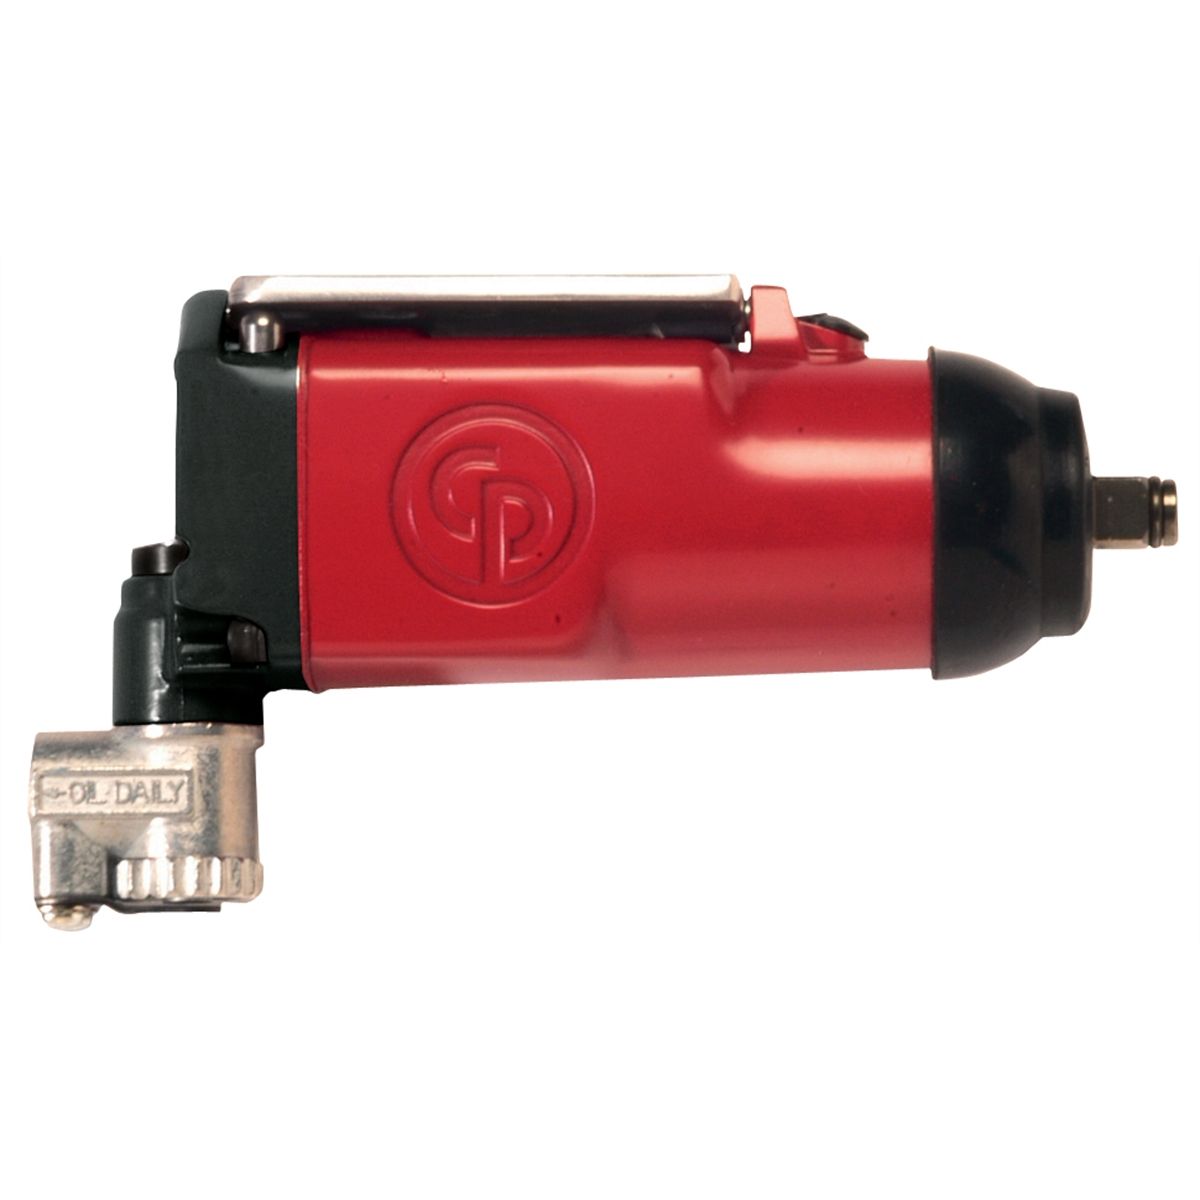 3/8" Inch Butterfly Air Impact Wrench CP 7722